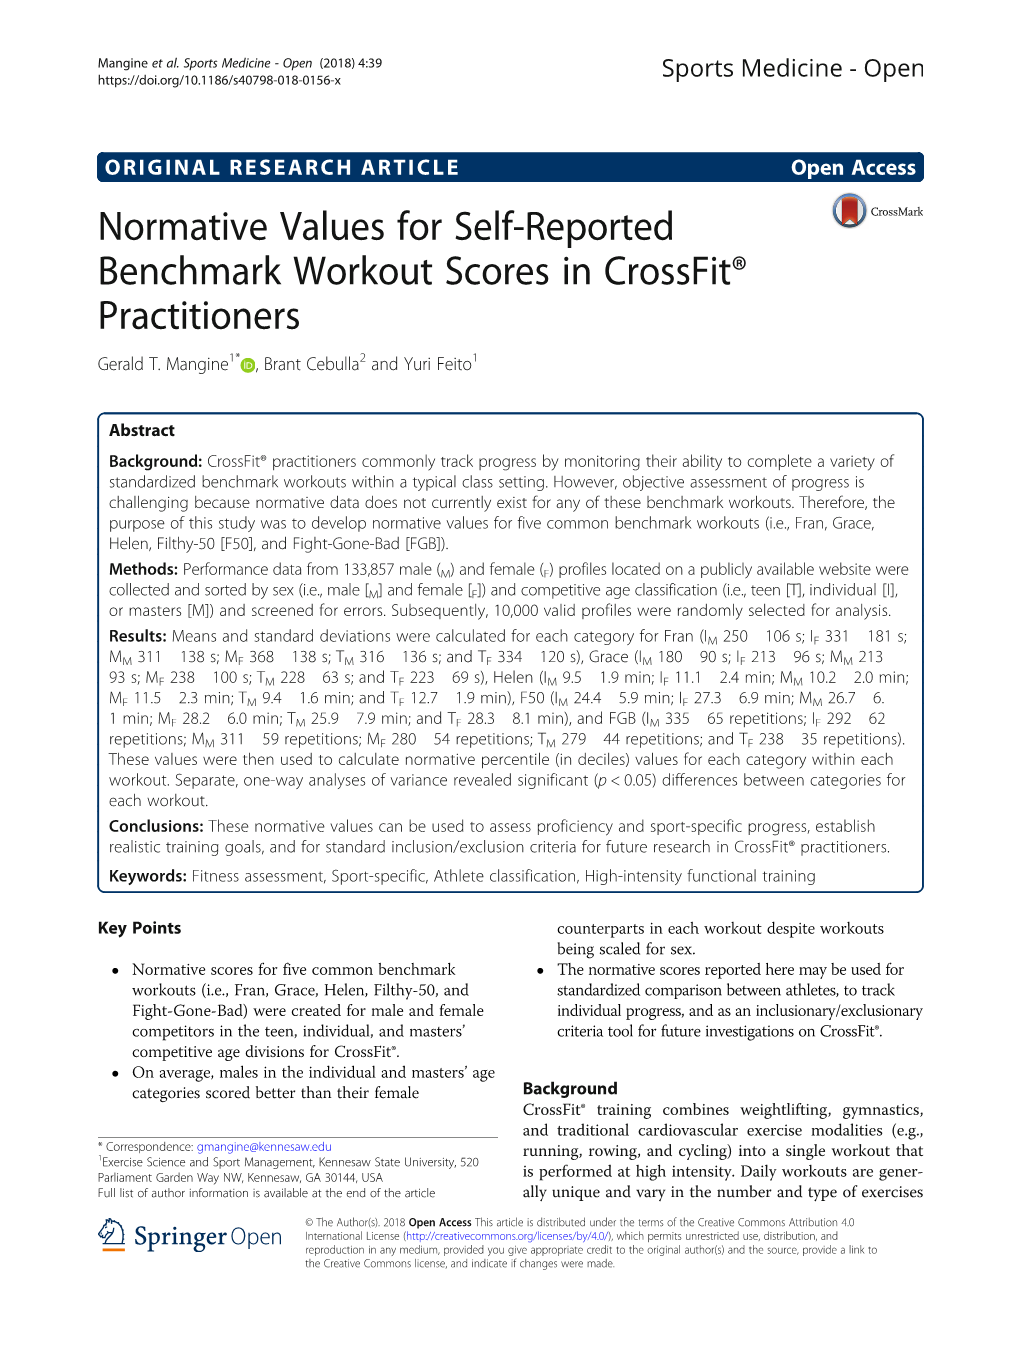 Normative Values for Self-Reported Benchmark Workout Scores in Crossfit® Practitioners Gerald T